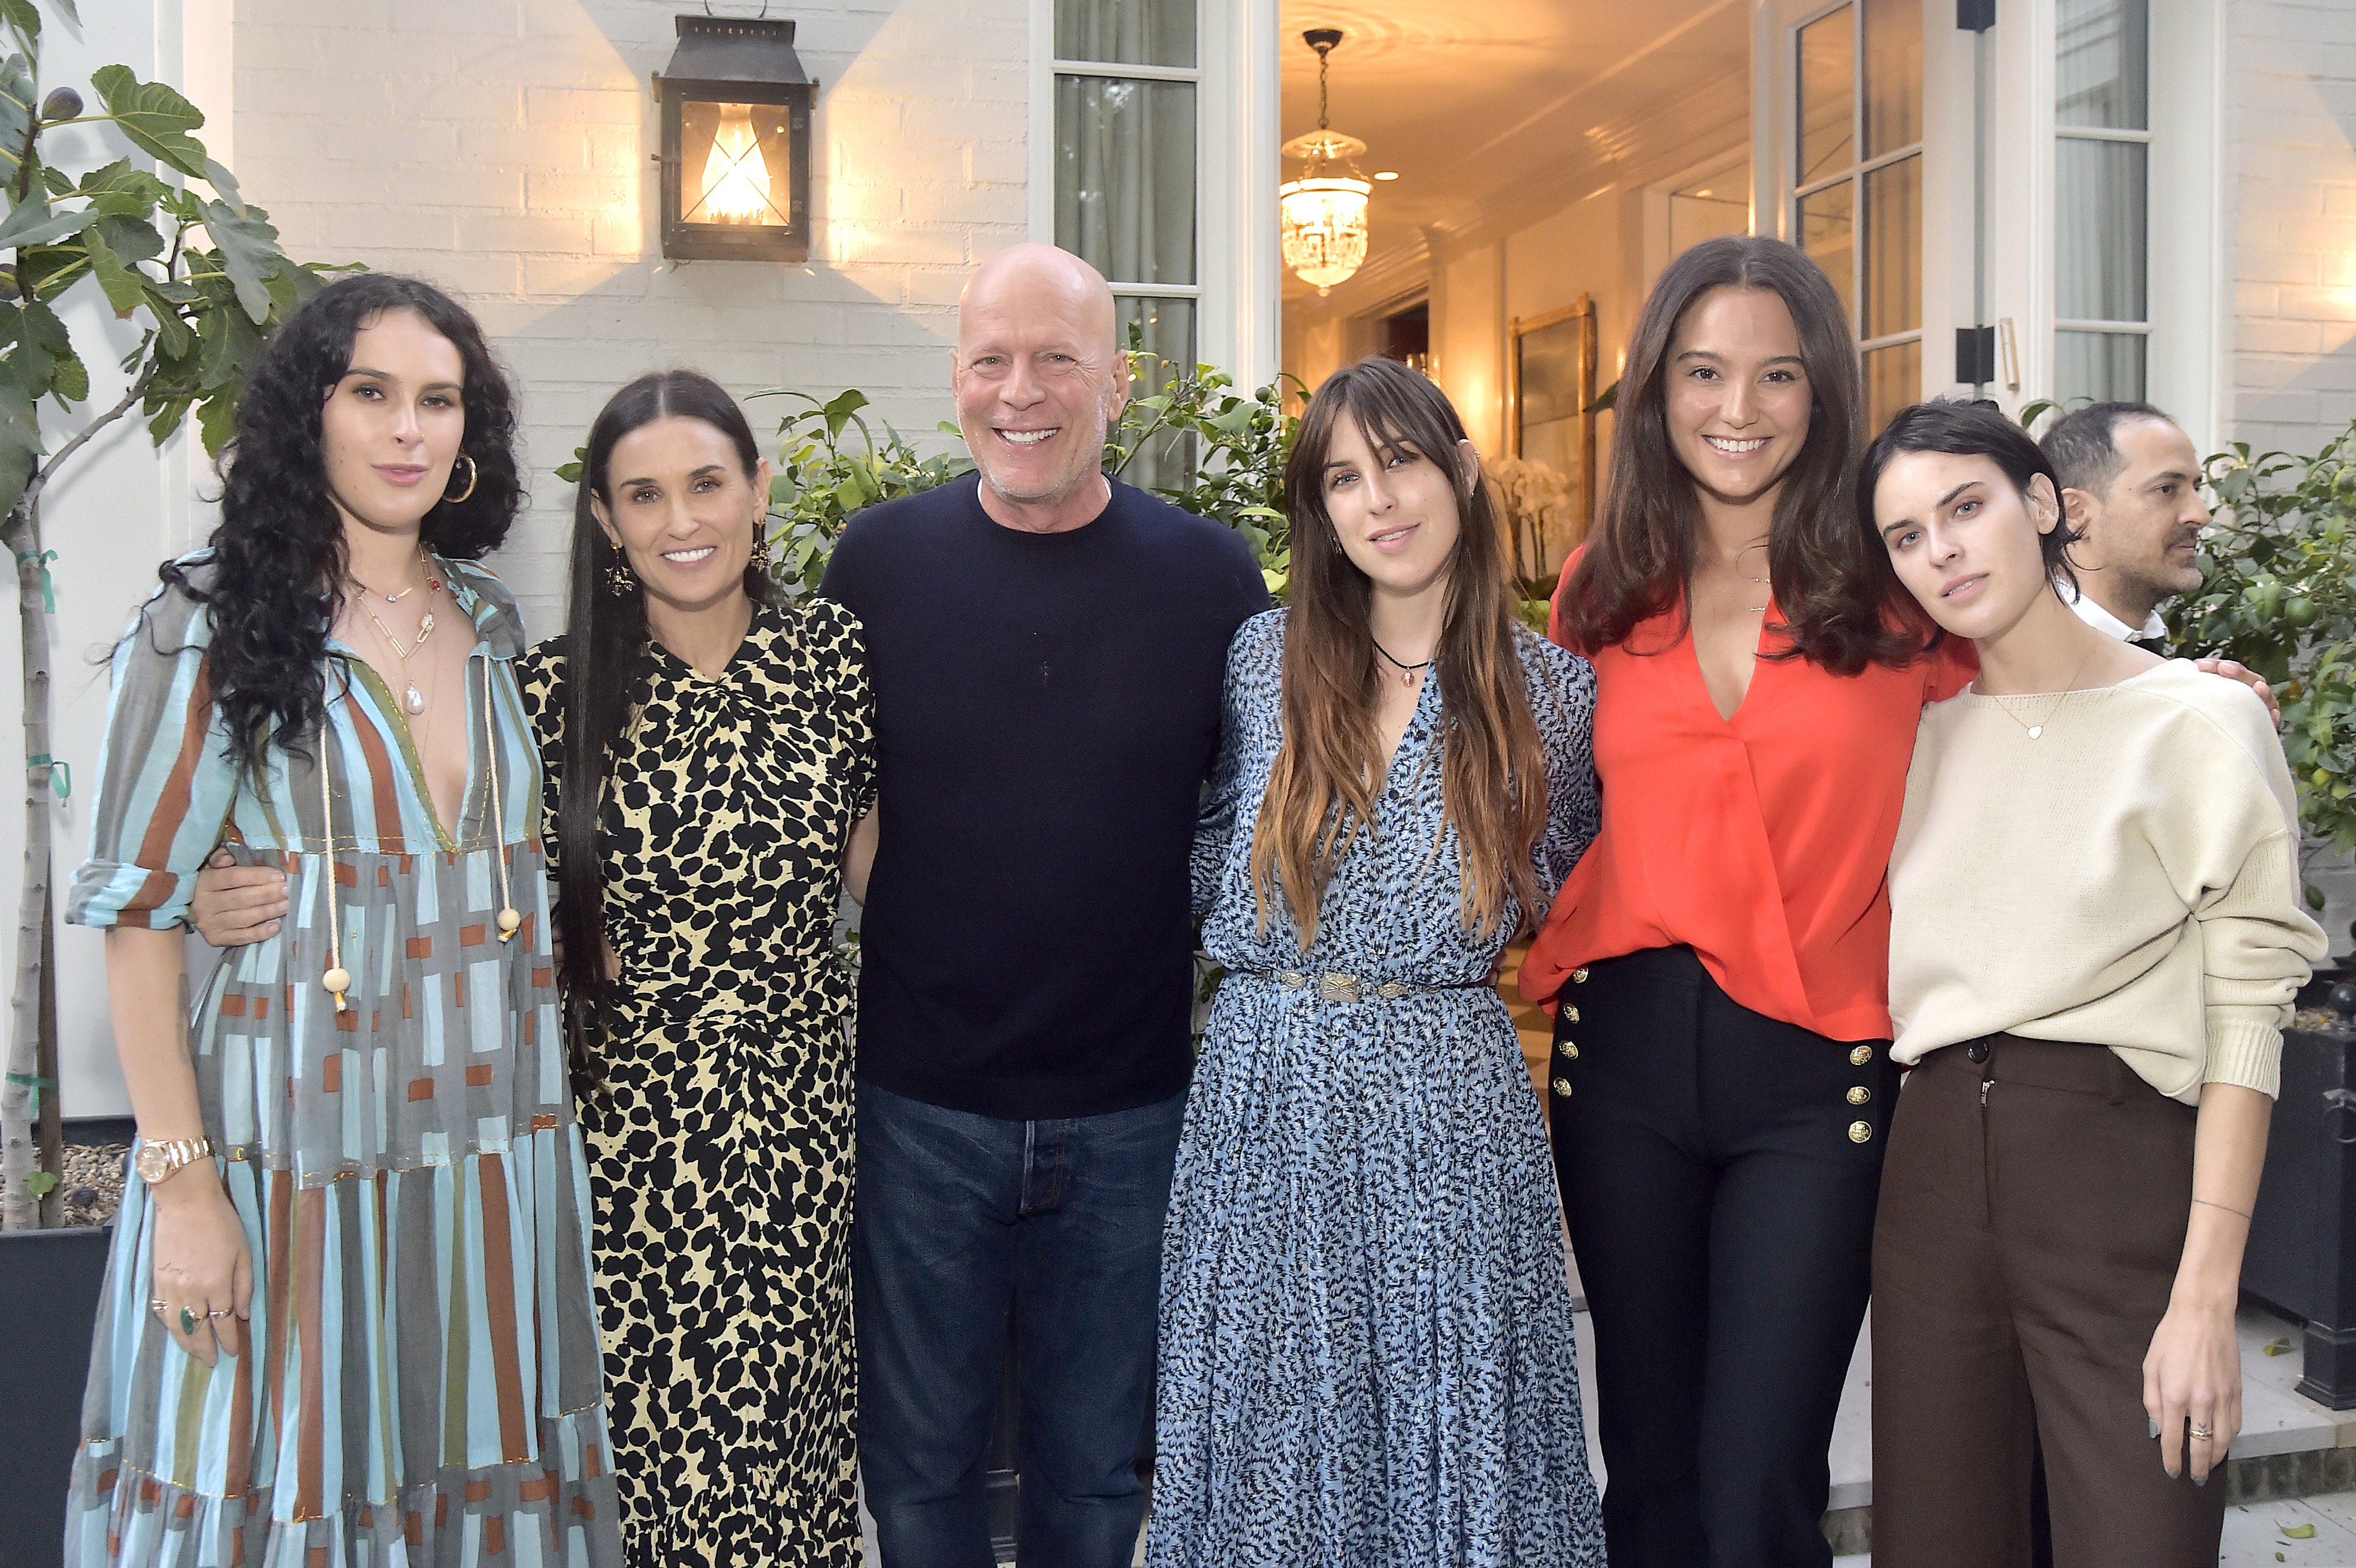 Rumer Willis, Demi Moore, Bruce Willis, Scout Willis, Emma Heming Willis, and Tallulah Willis at Demi's "Inside Out" book party on September 23, 2019, in Los Angeles, California | Source: Getty Images